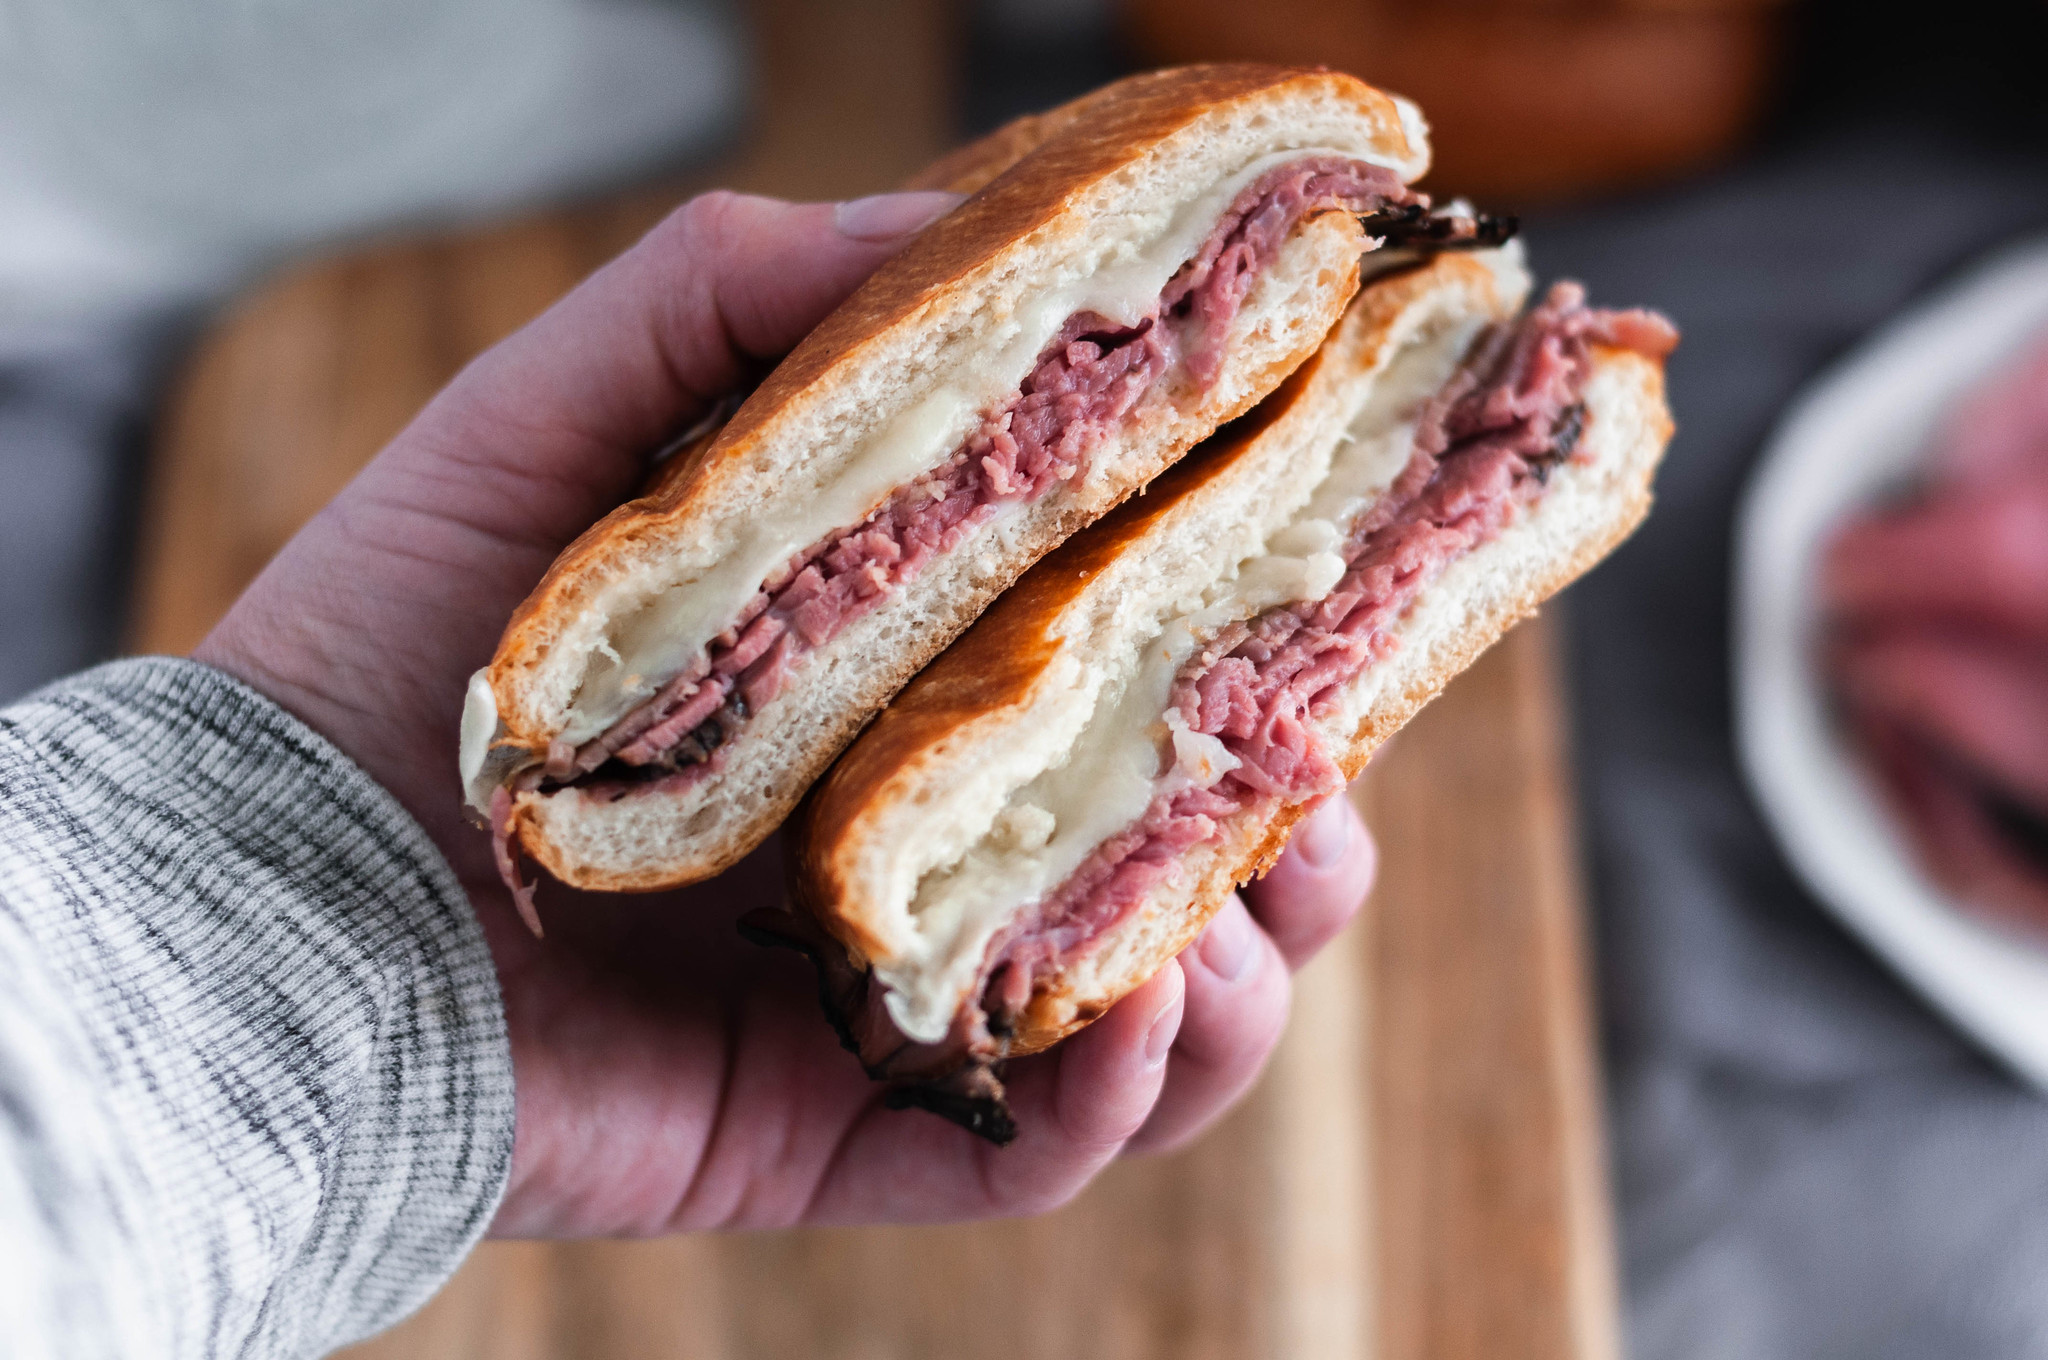 Meet your new favorite 15 minute meal, the Roast Beef Melt. Deli roast beef, melted provolone and horseradish sauce all on a crusty roll and toasted to perfection under the broiler.